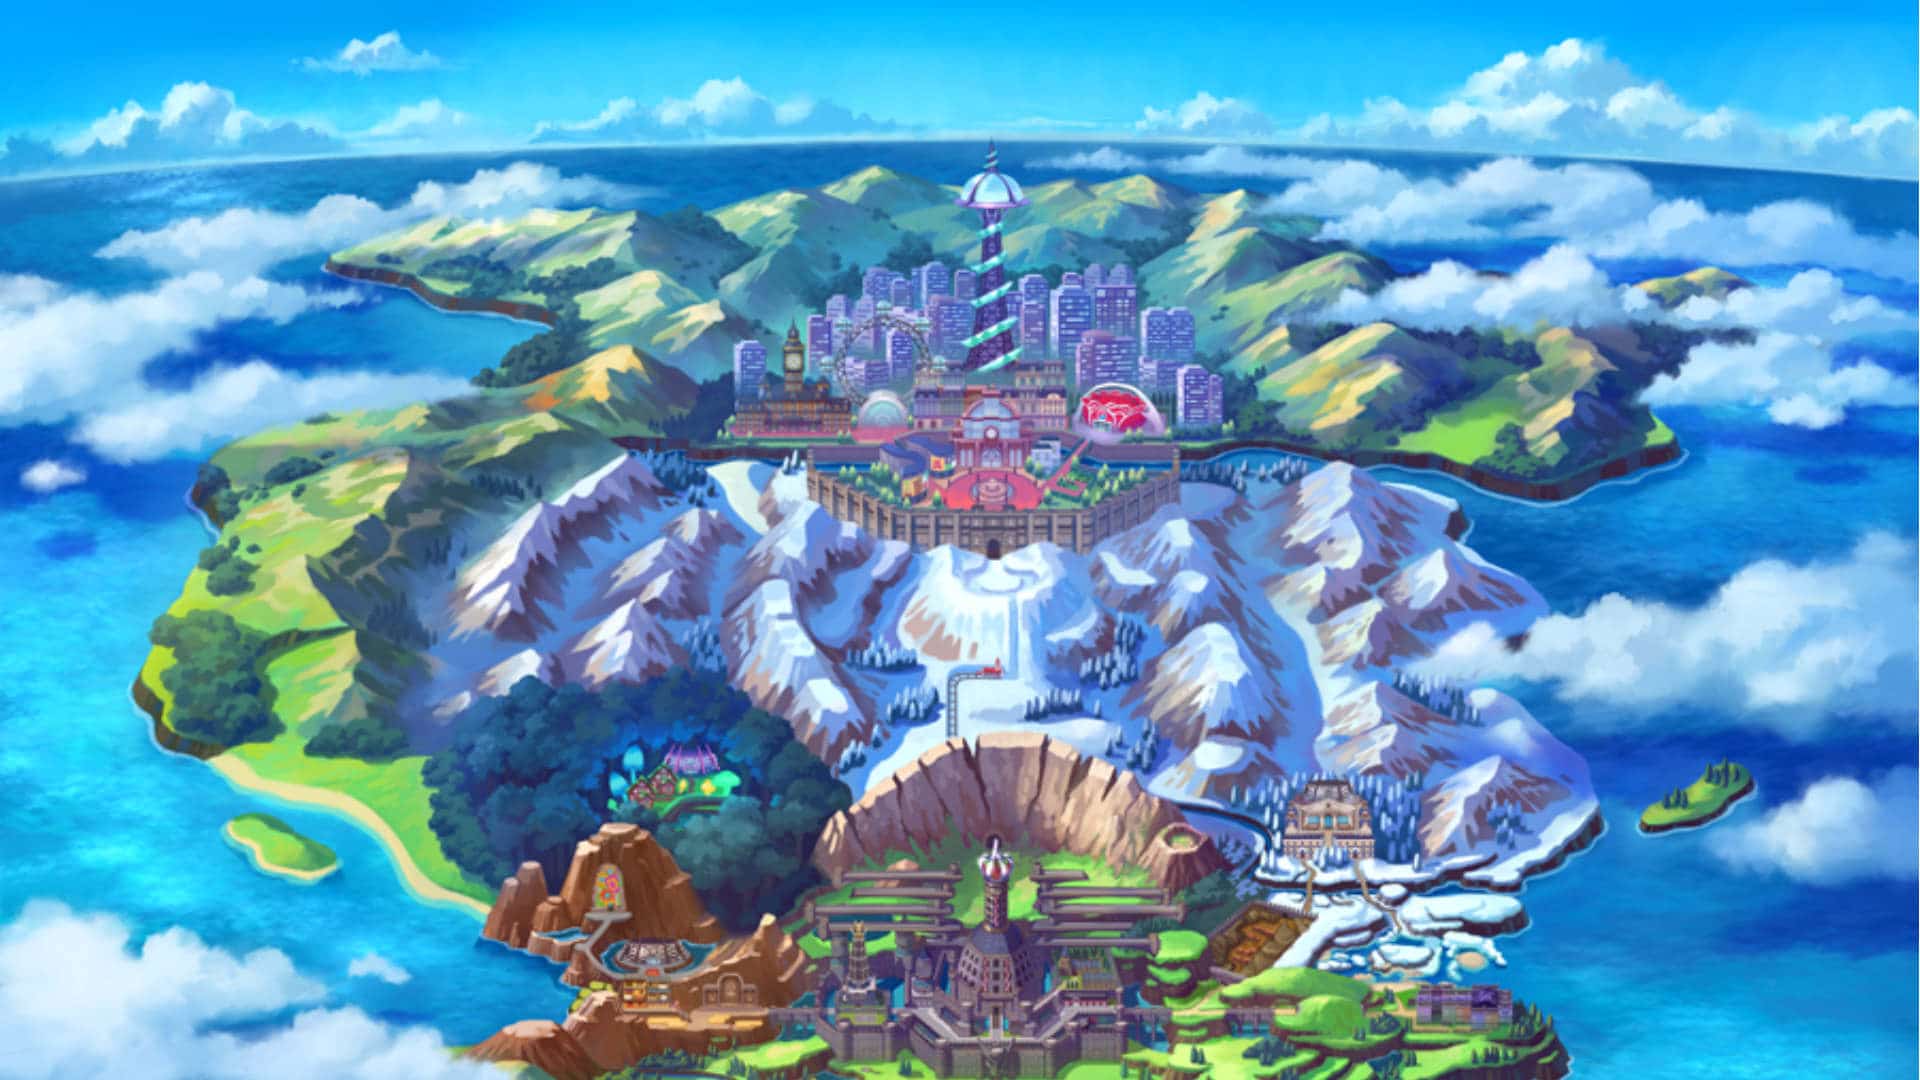 They claim that these are the 10 best Pokémon regions to date